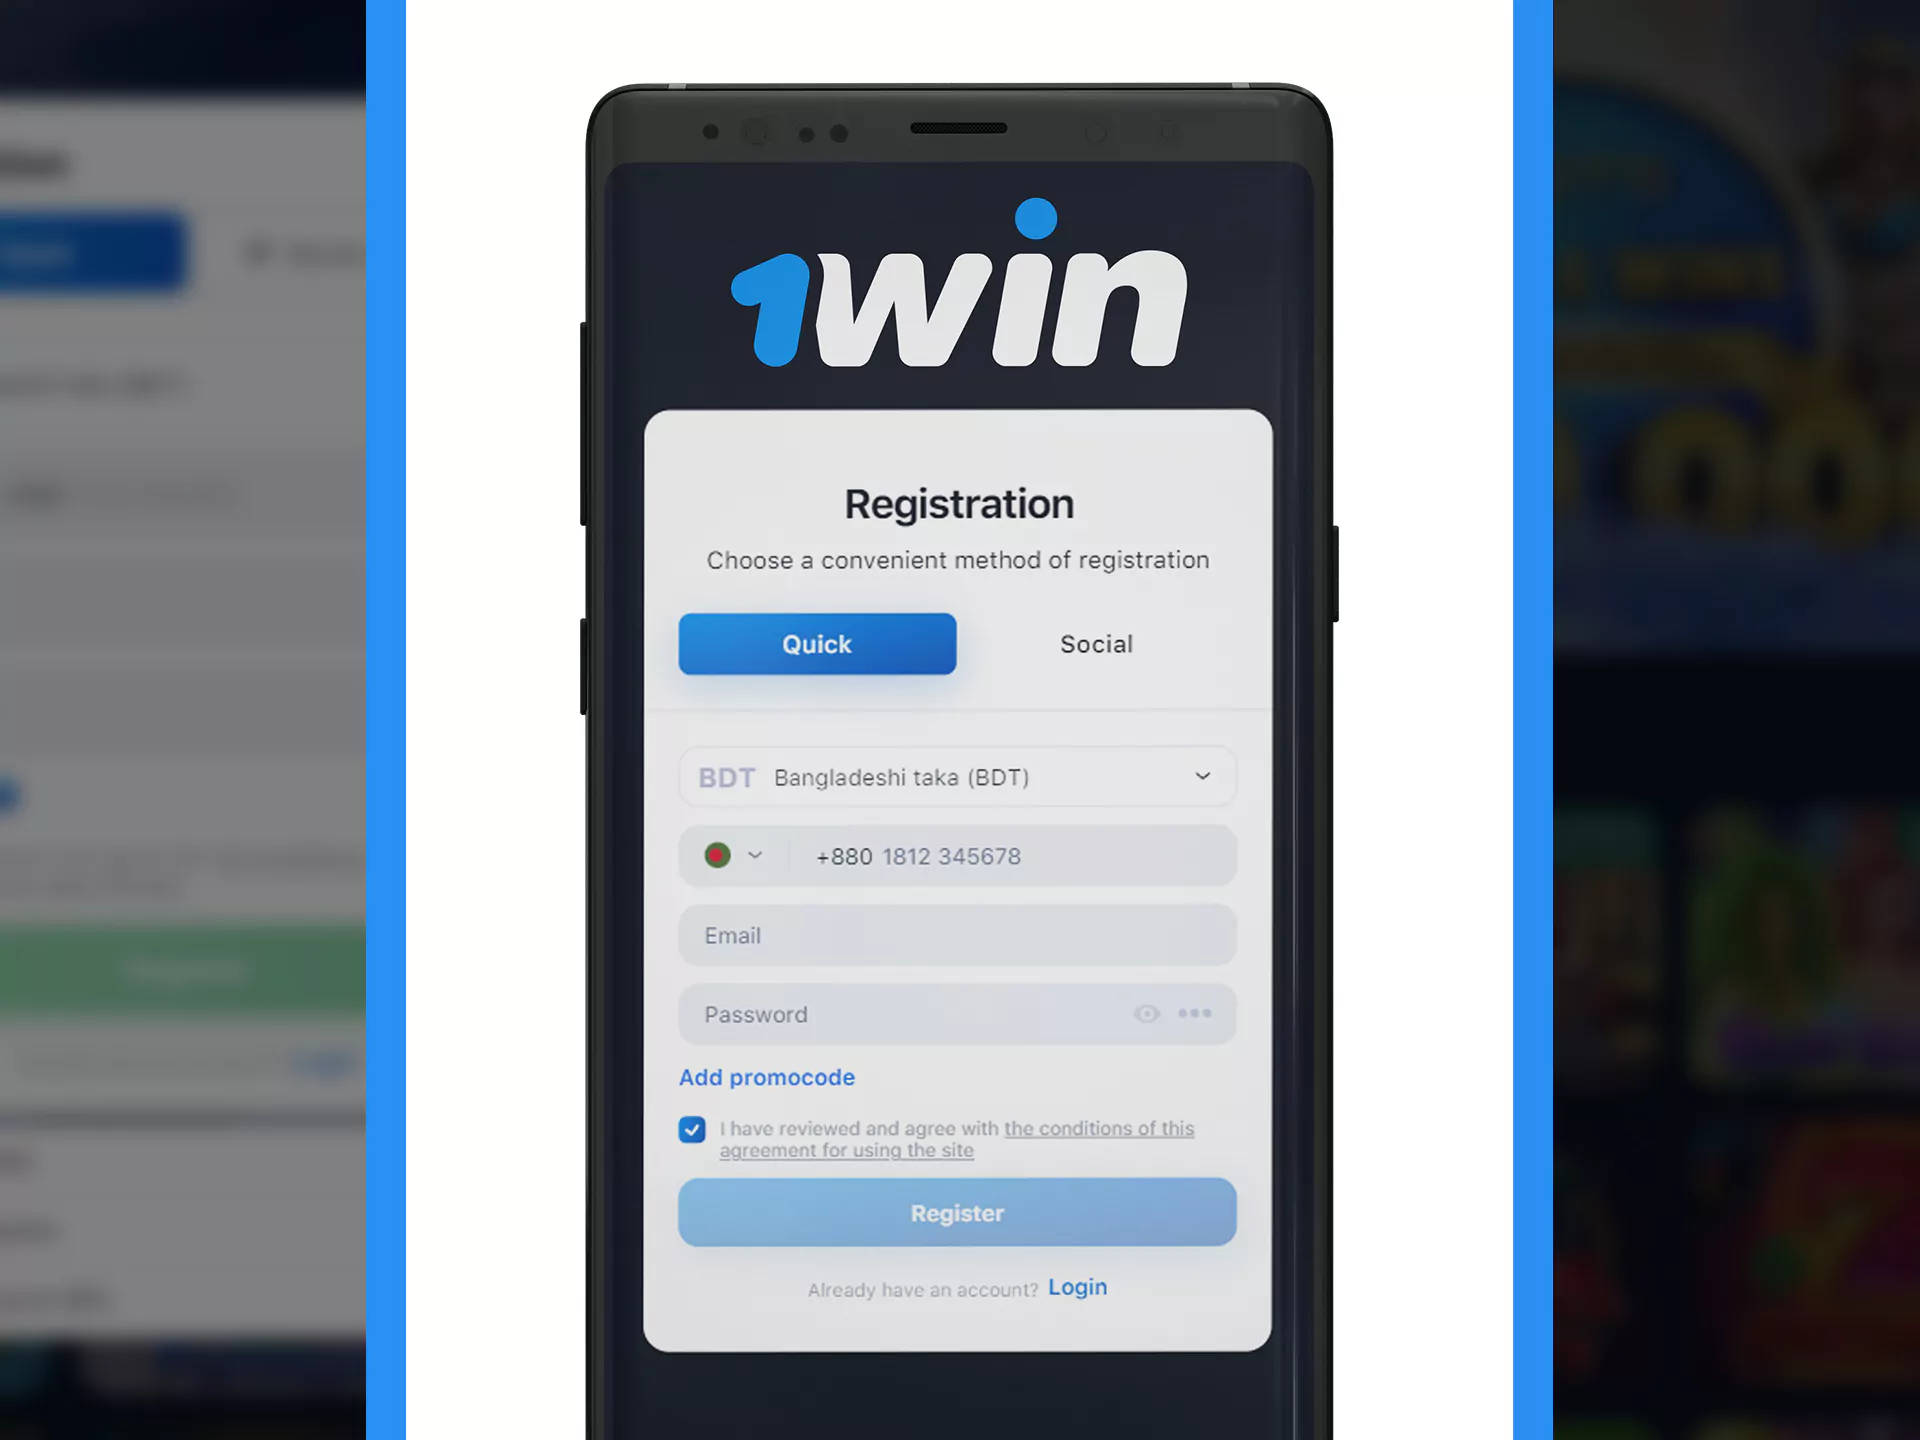 Register quicker with the 1win app.